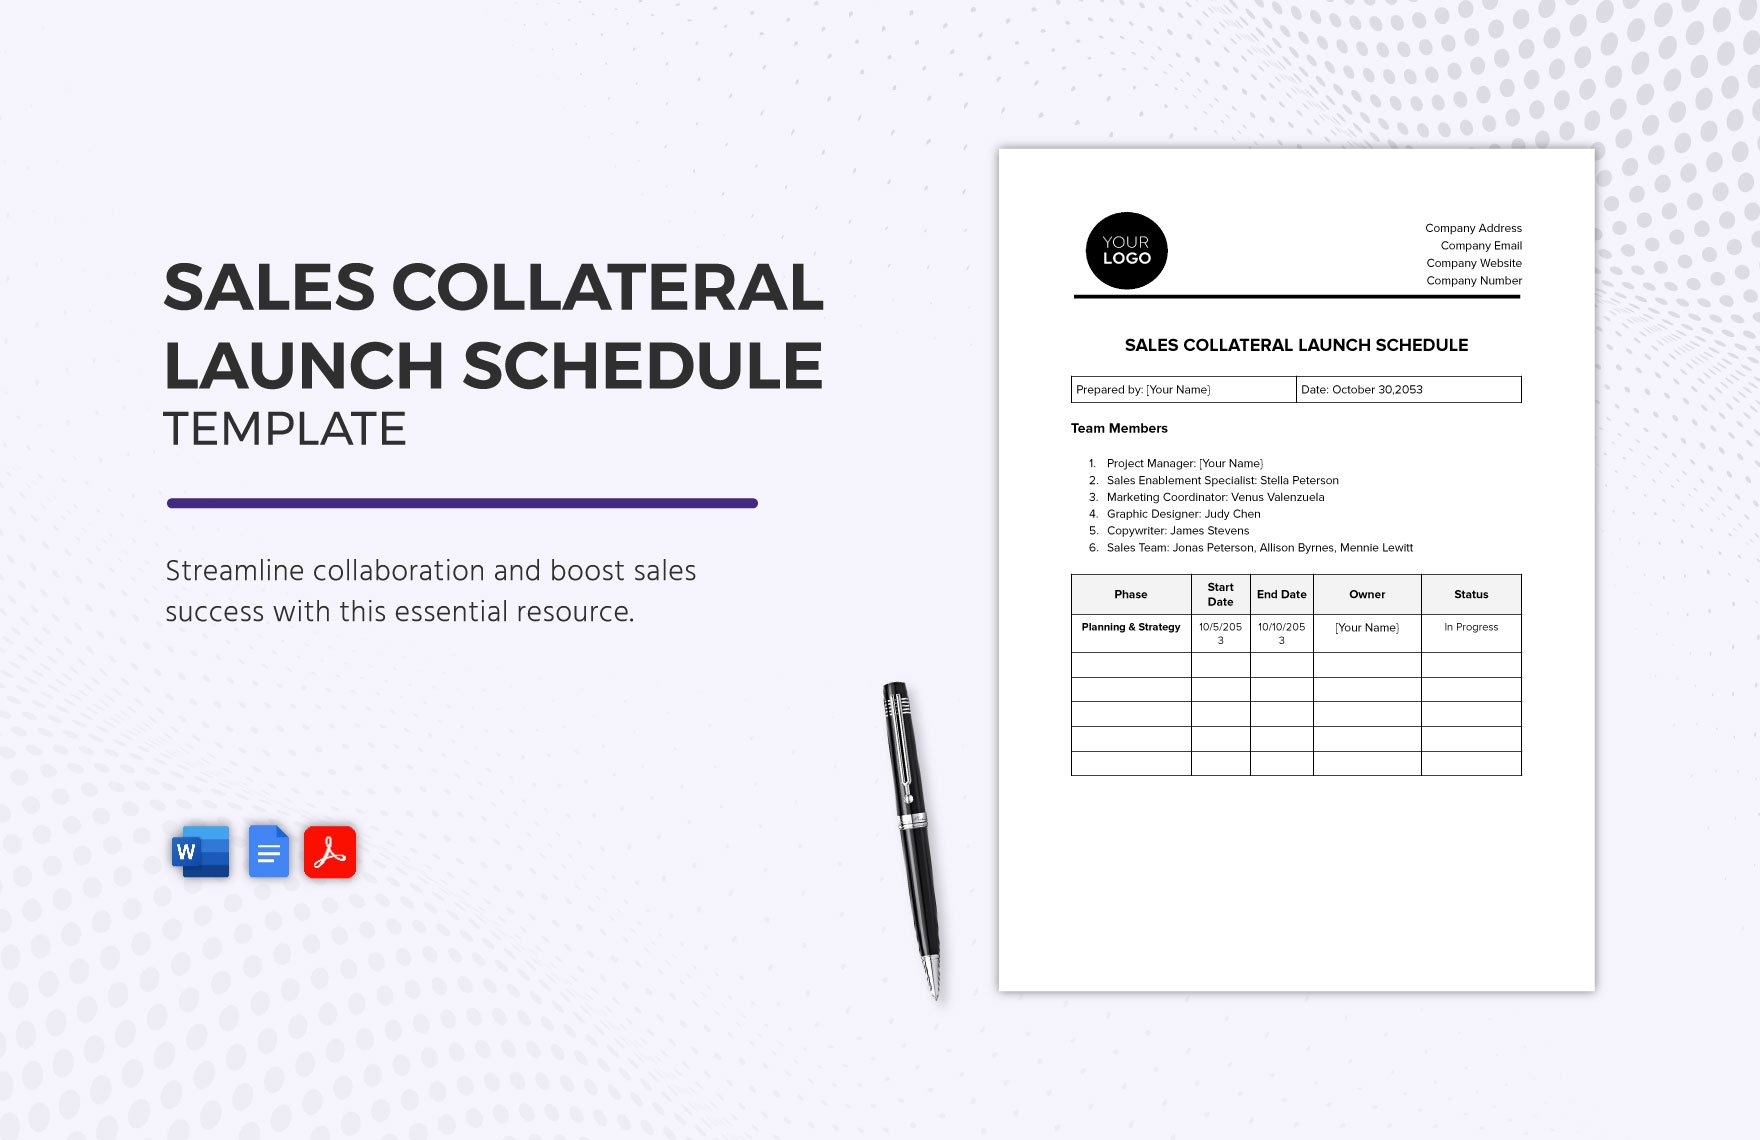 Sales Collateral Launch Schedule Template in Word, Google Docs, PDF